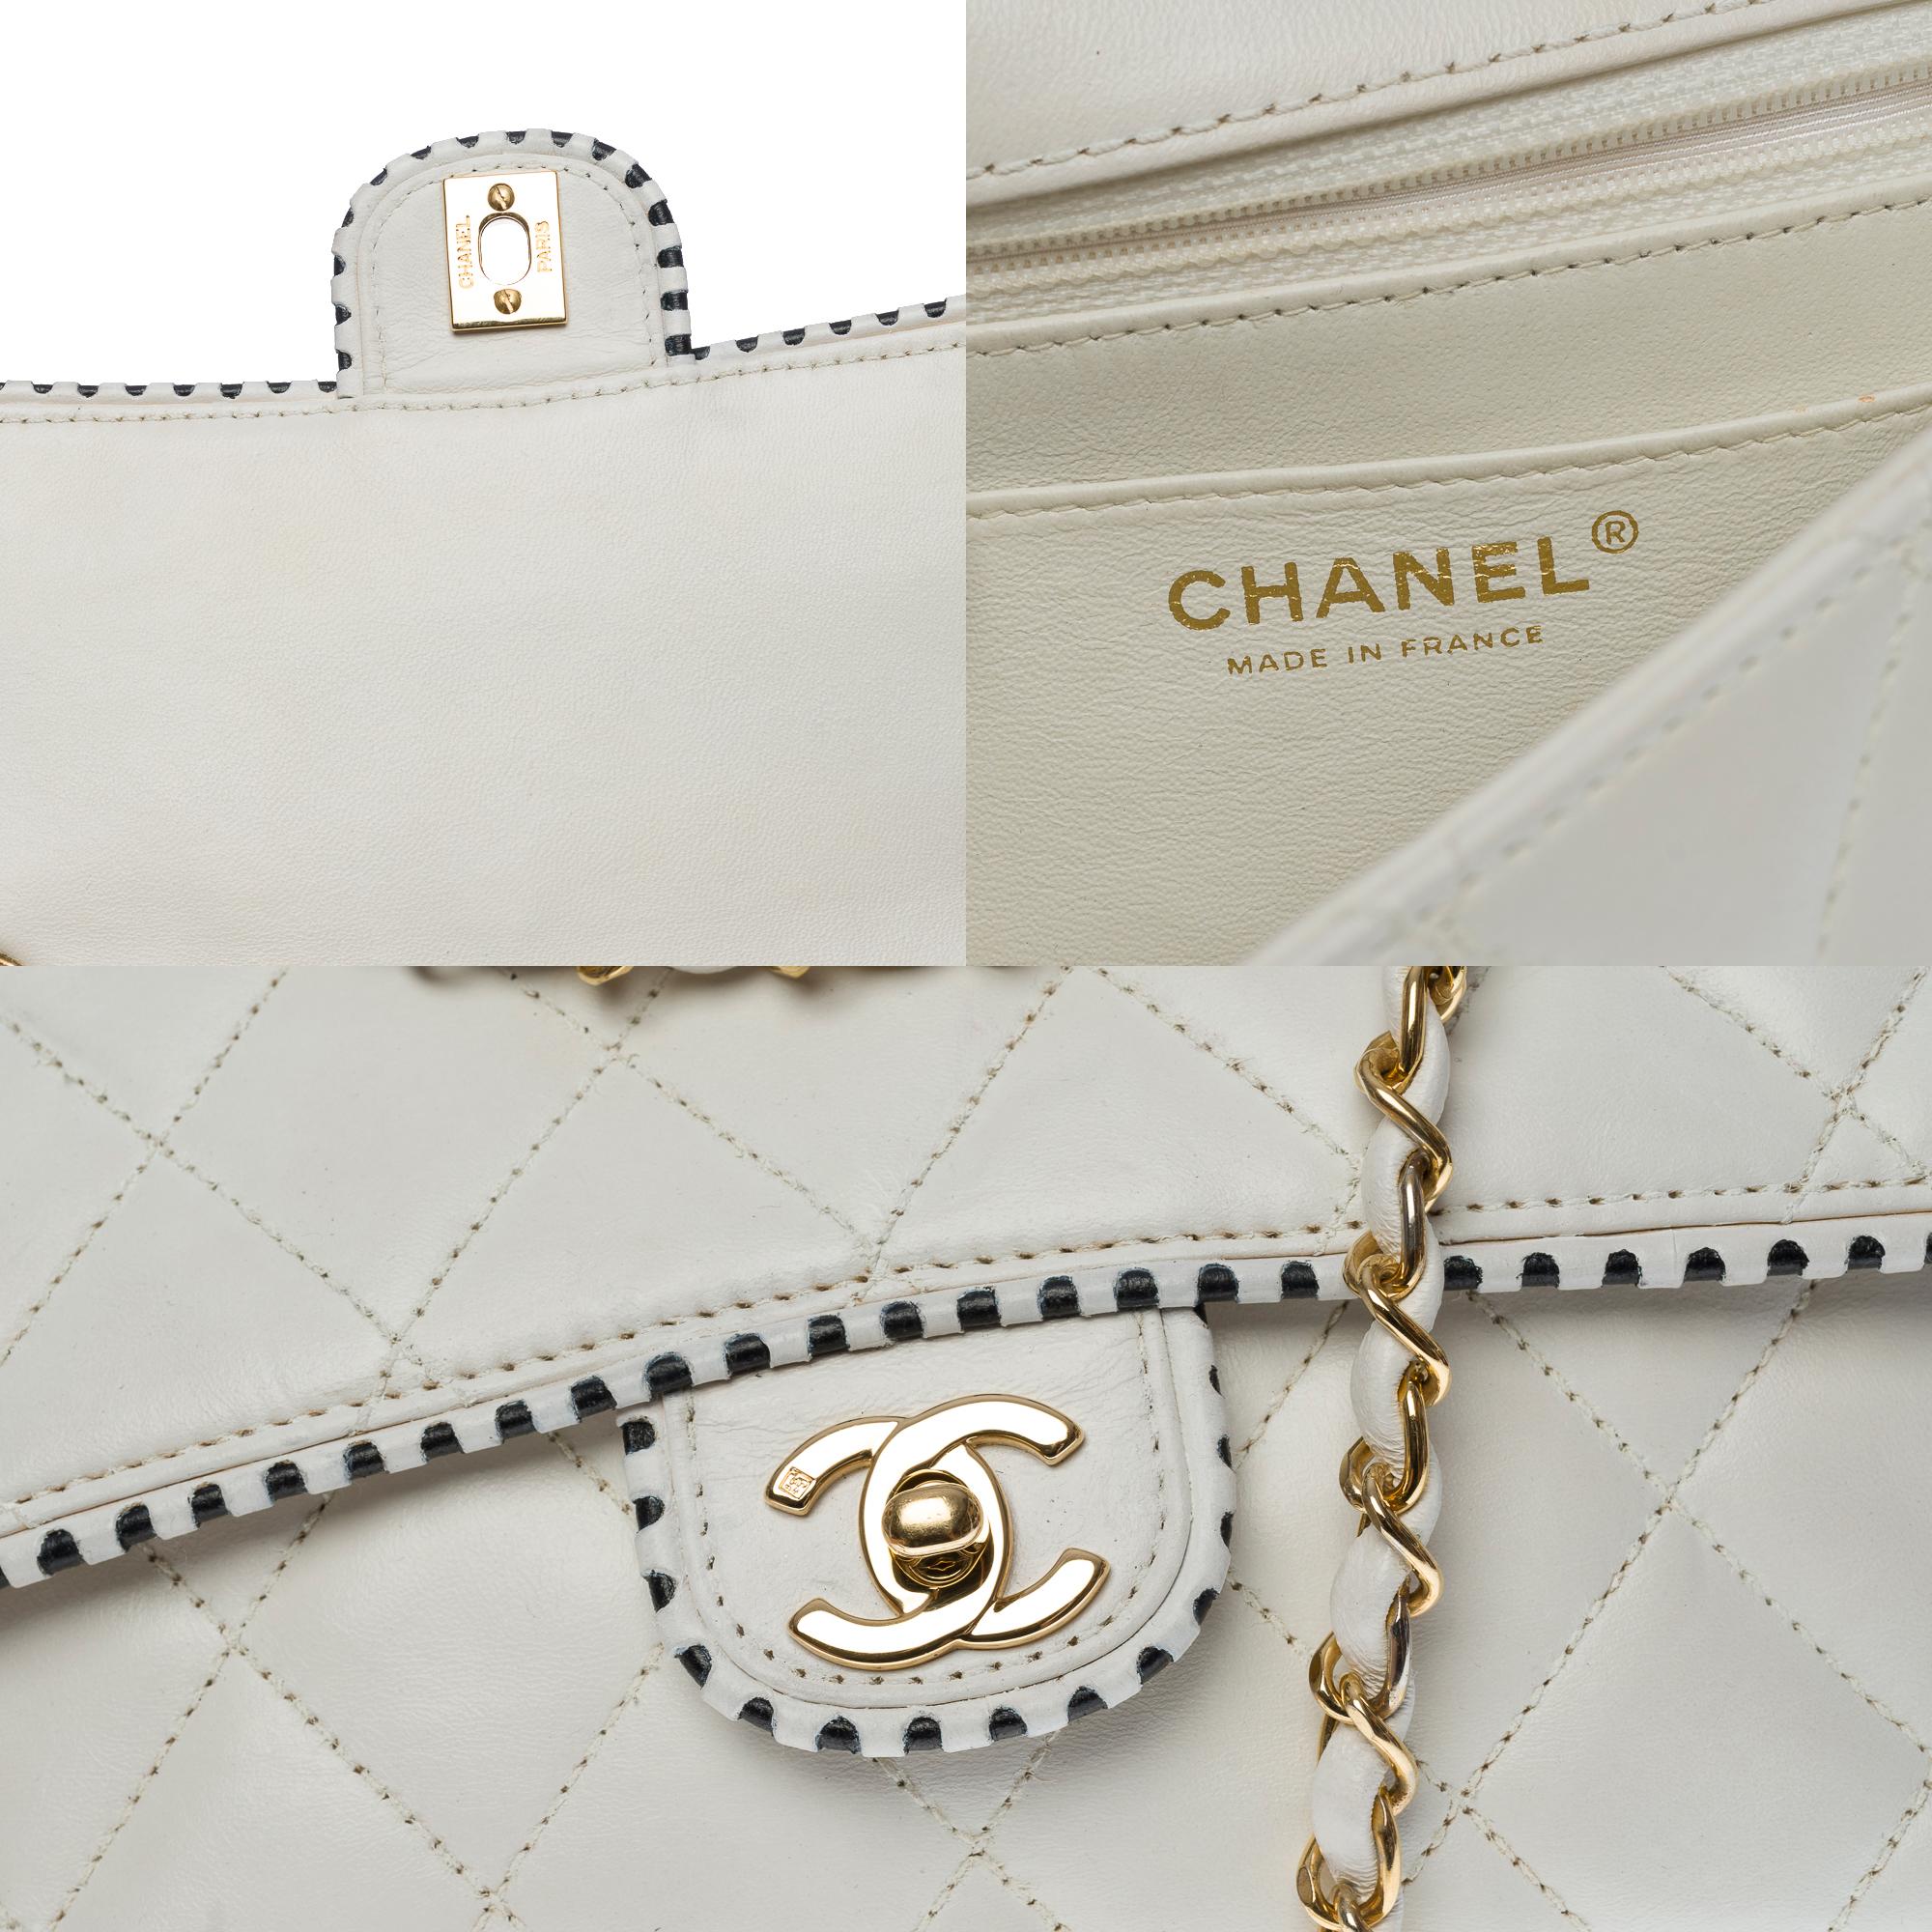 Chanel Timeless Medium single flap shoulder bag in white quilted leather, GHW For Sale 1